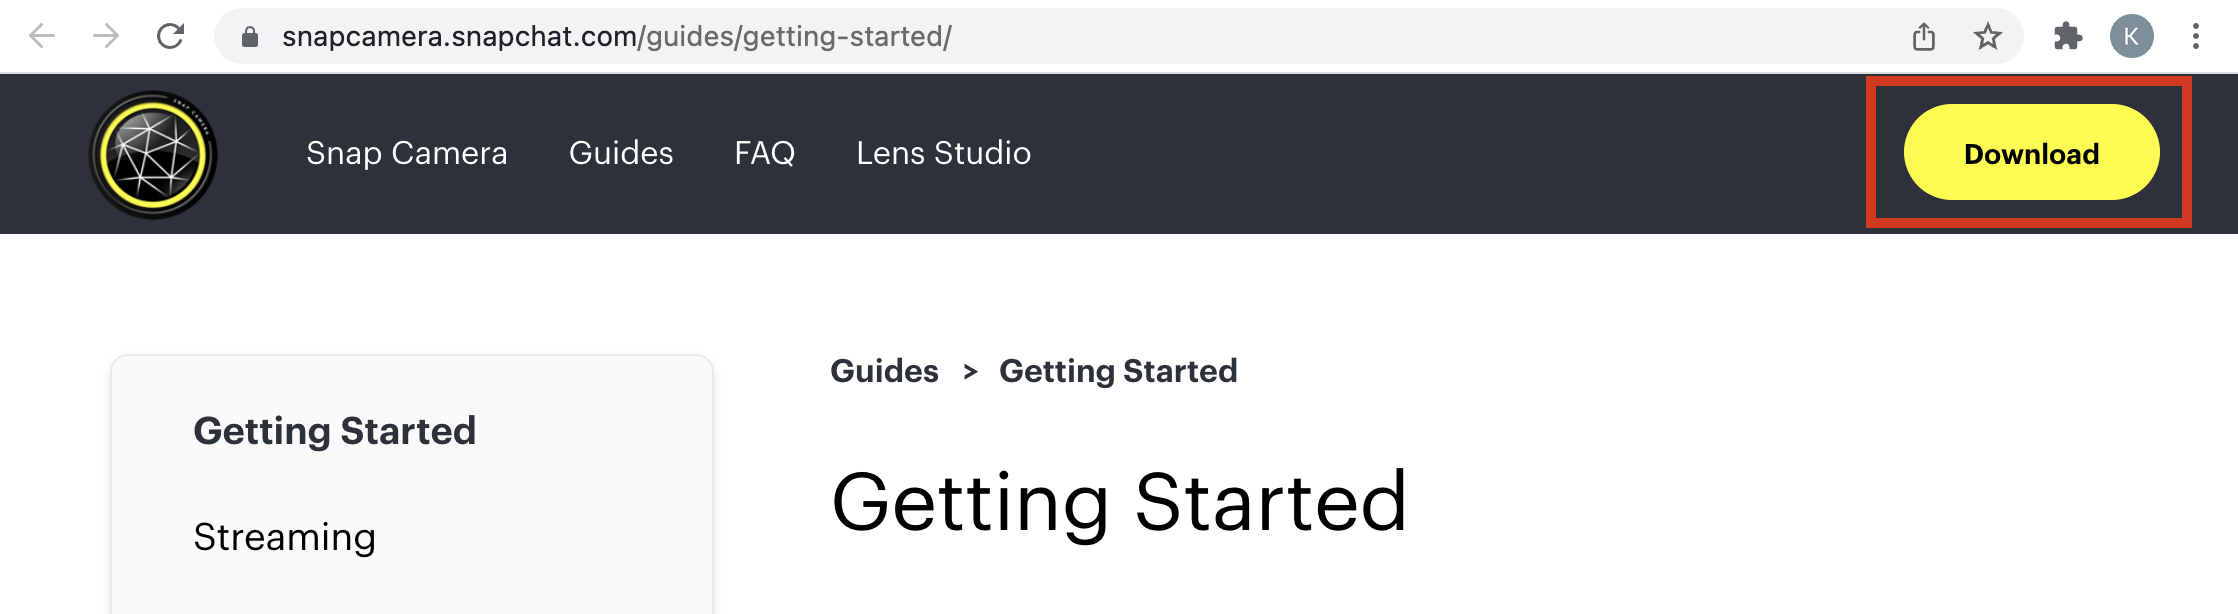 Snap_Camera_Start_Guide.png